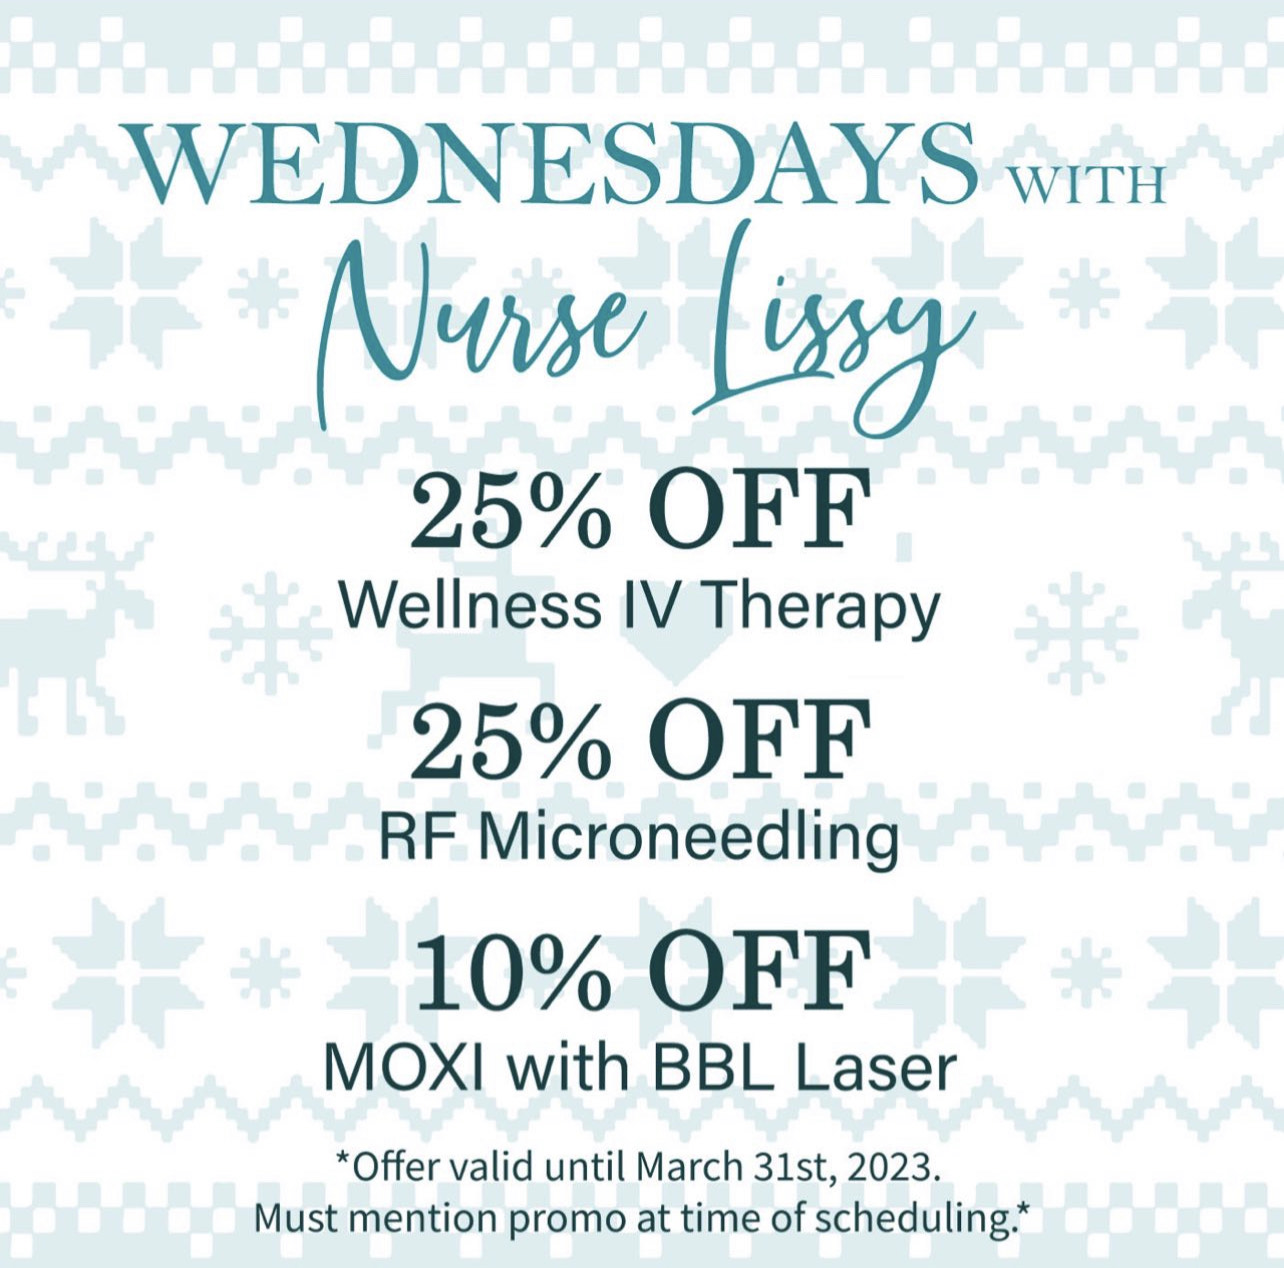 Wednesday's with Nurse Lissy Special Pricing